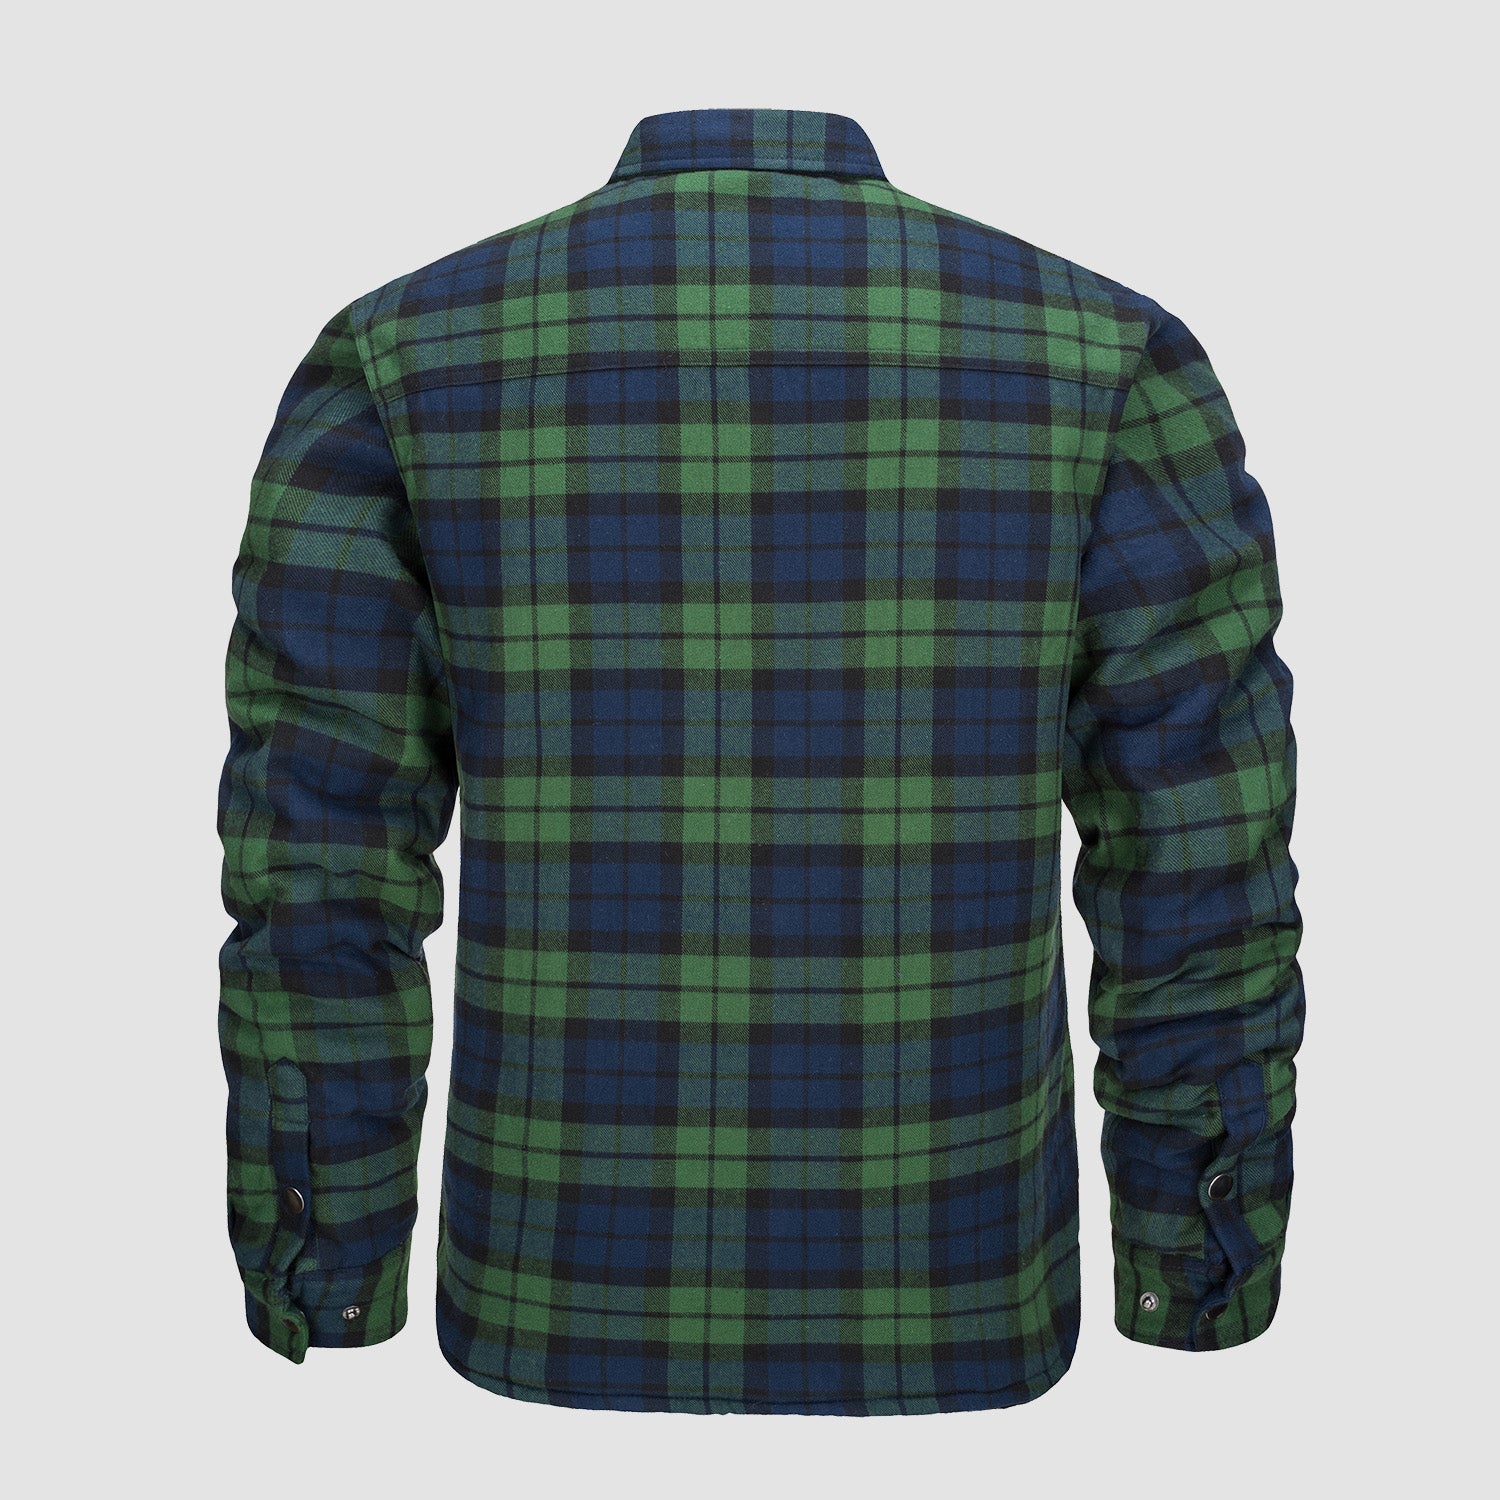 Mens Army Green Flannel Button Down Shirt Work Jackets For Men Regular Fit,  Long Sleeve, Casual Coat For Outdoor Activities Siz3001 From Sadfk, $35.33